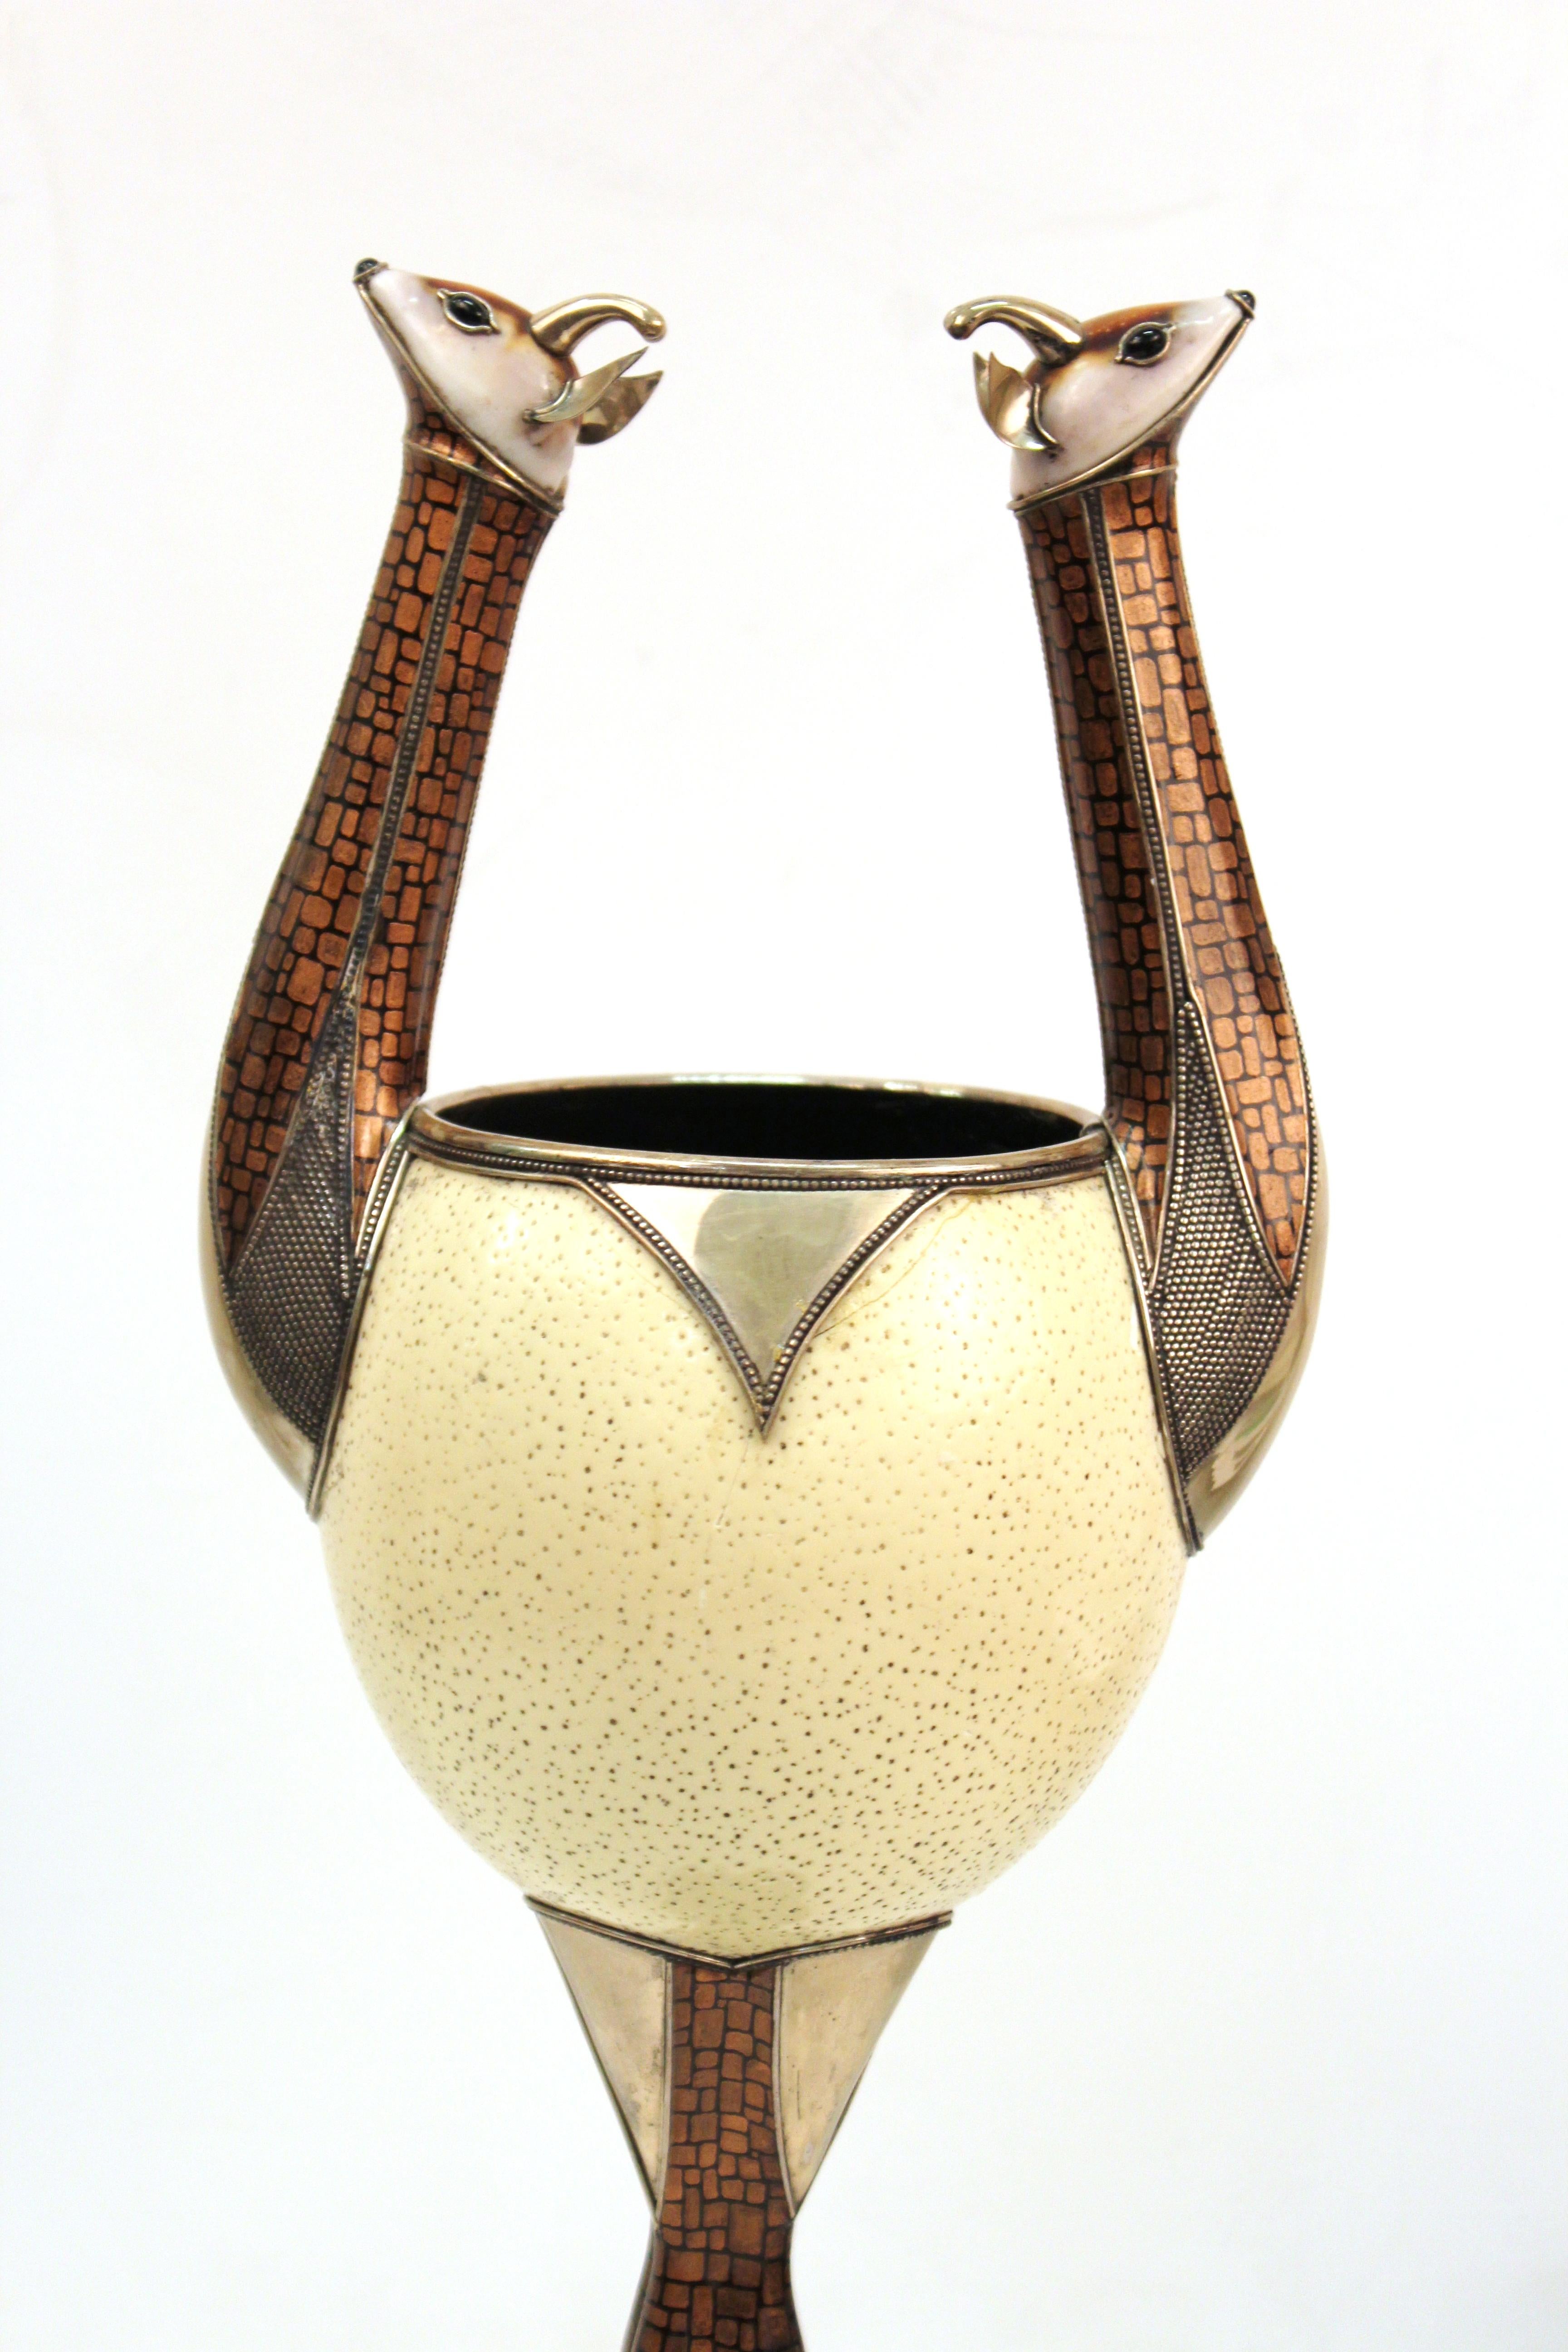 Modern sculptural ostrich egg cup or urn with animal handles. The piece has deer head handles and hooved feet, with hammered metal, textured and painted surfaces. The piece was likely made in the circa 1970s and has a small plate marked 'Estevez' on